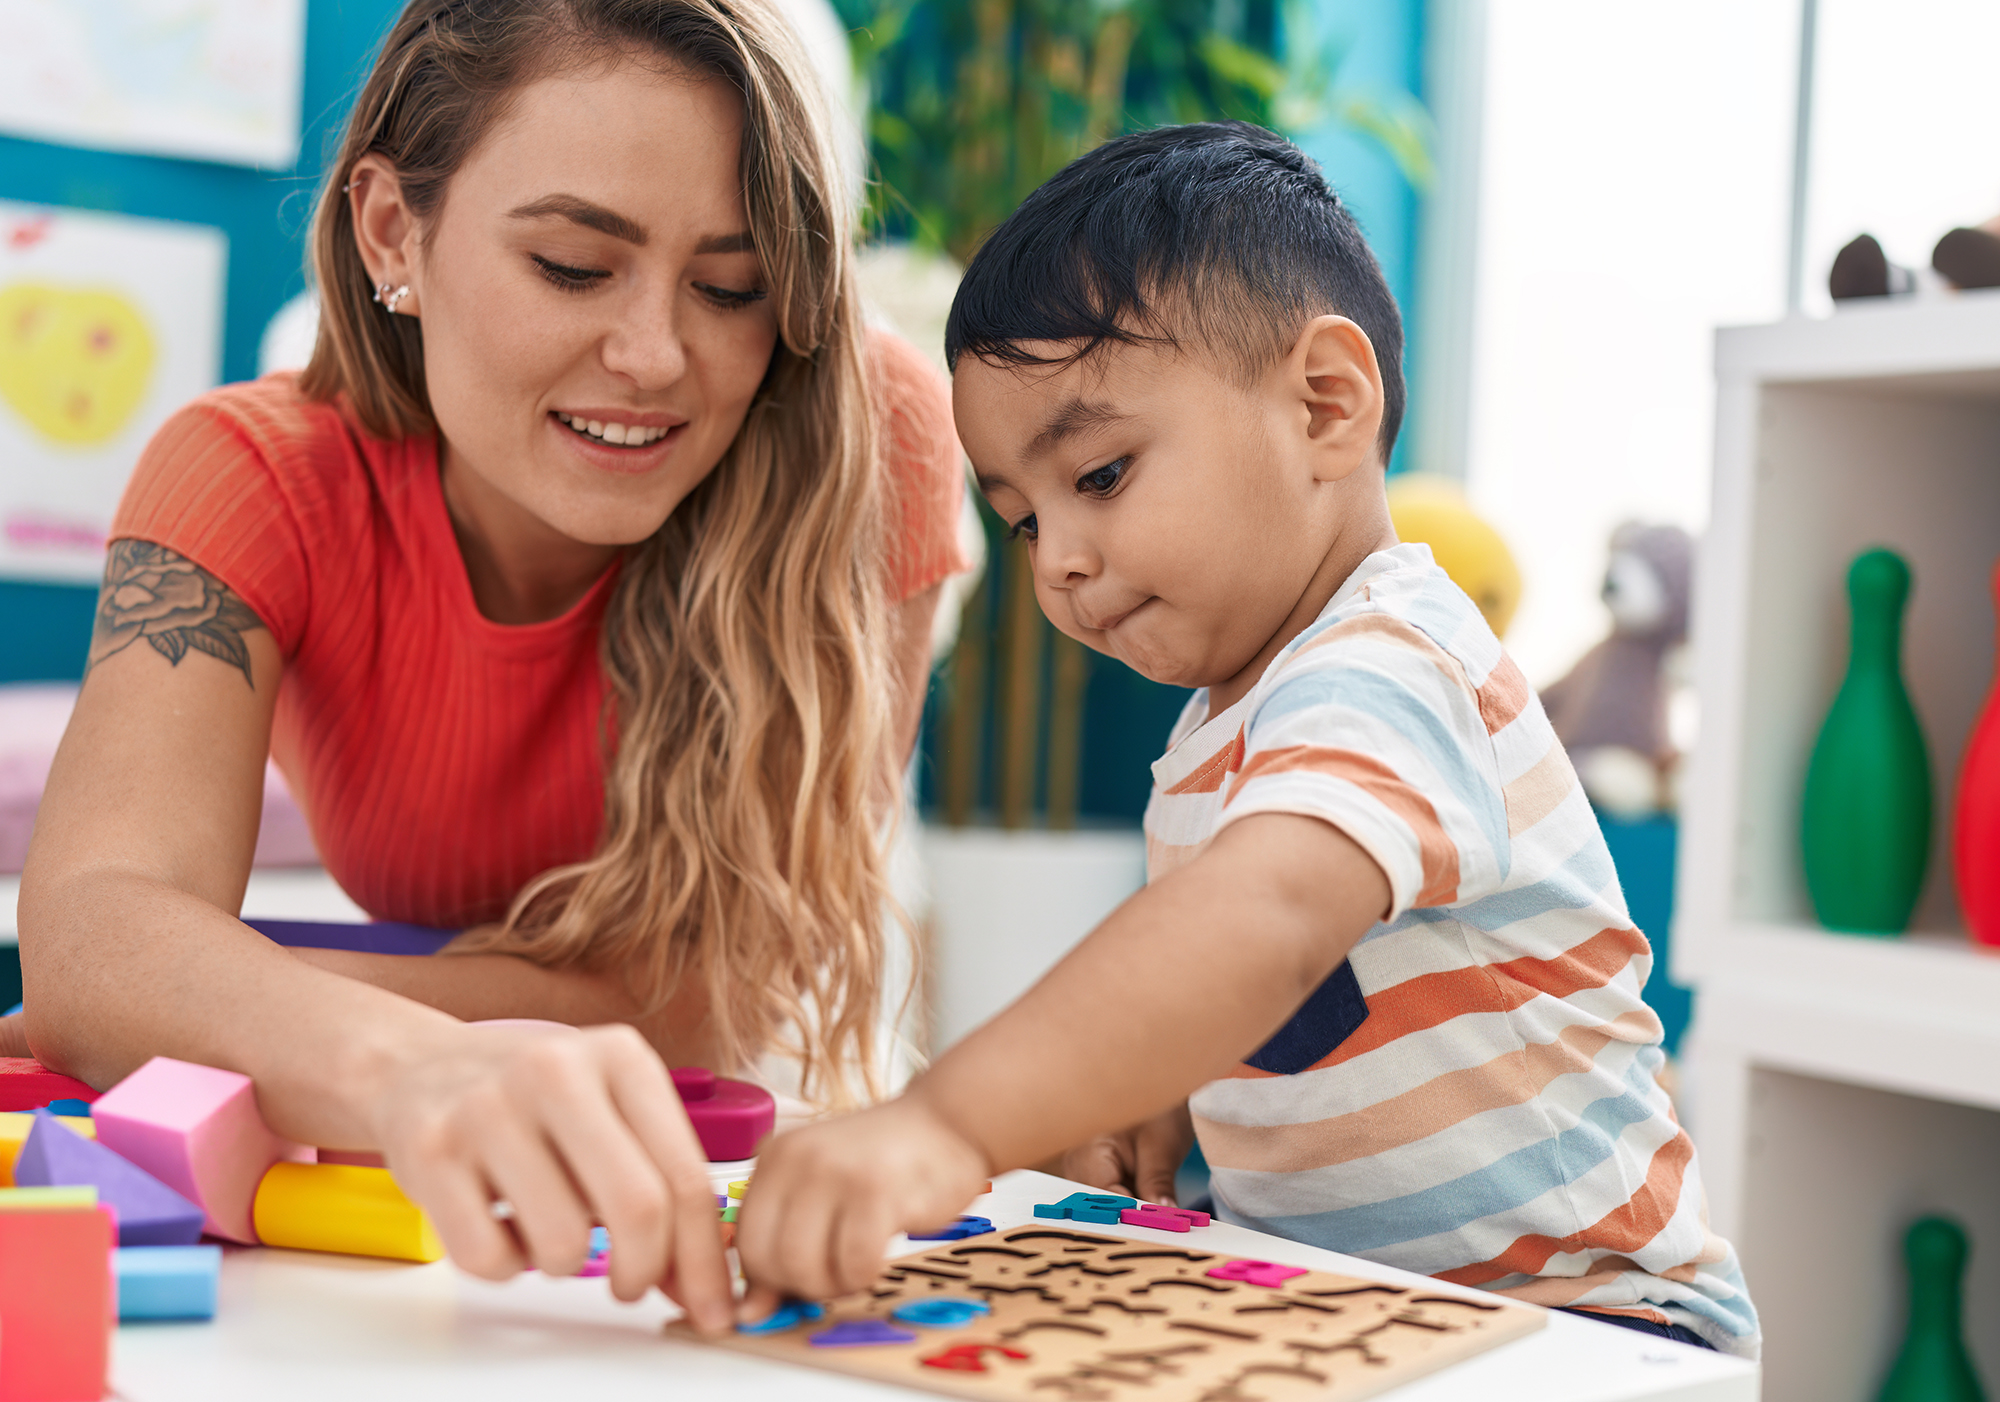 "A woman with long blond hair and a red shirt helps a young boy with dark hair and a striped shirt as they put together an alphabet puzzle at a table"